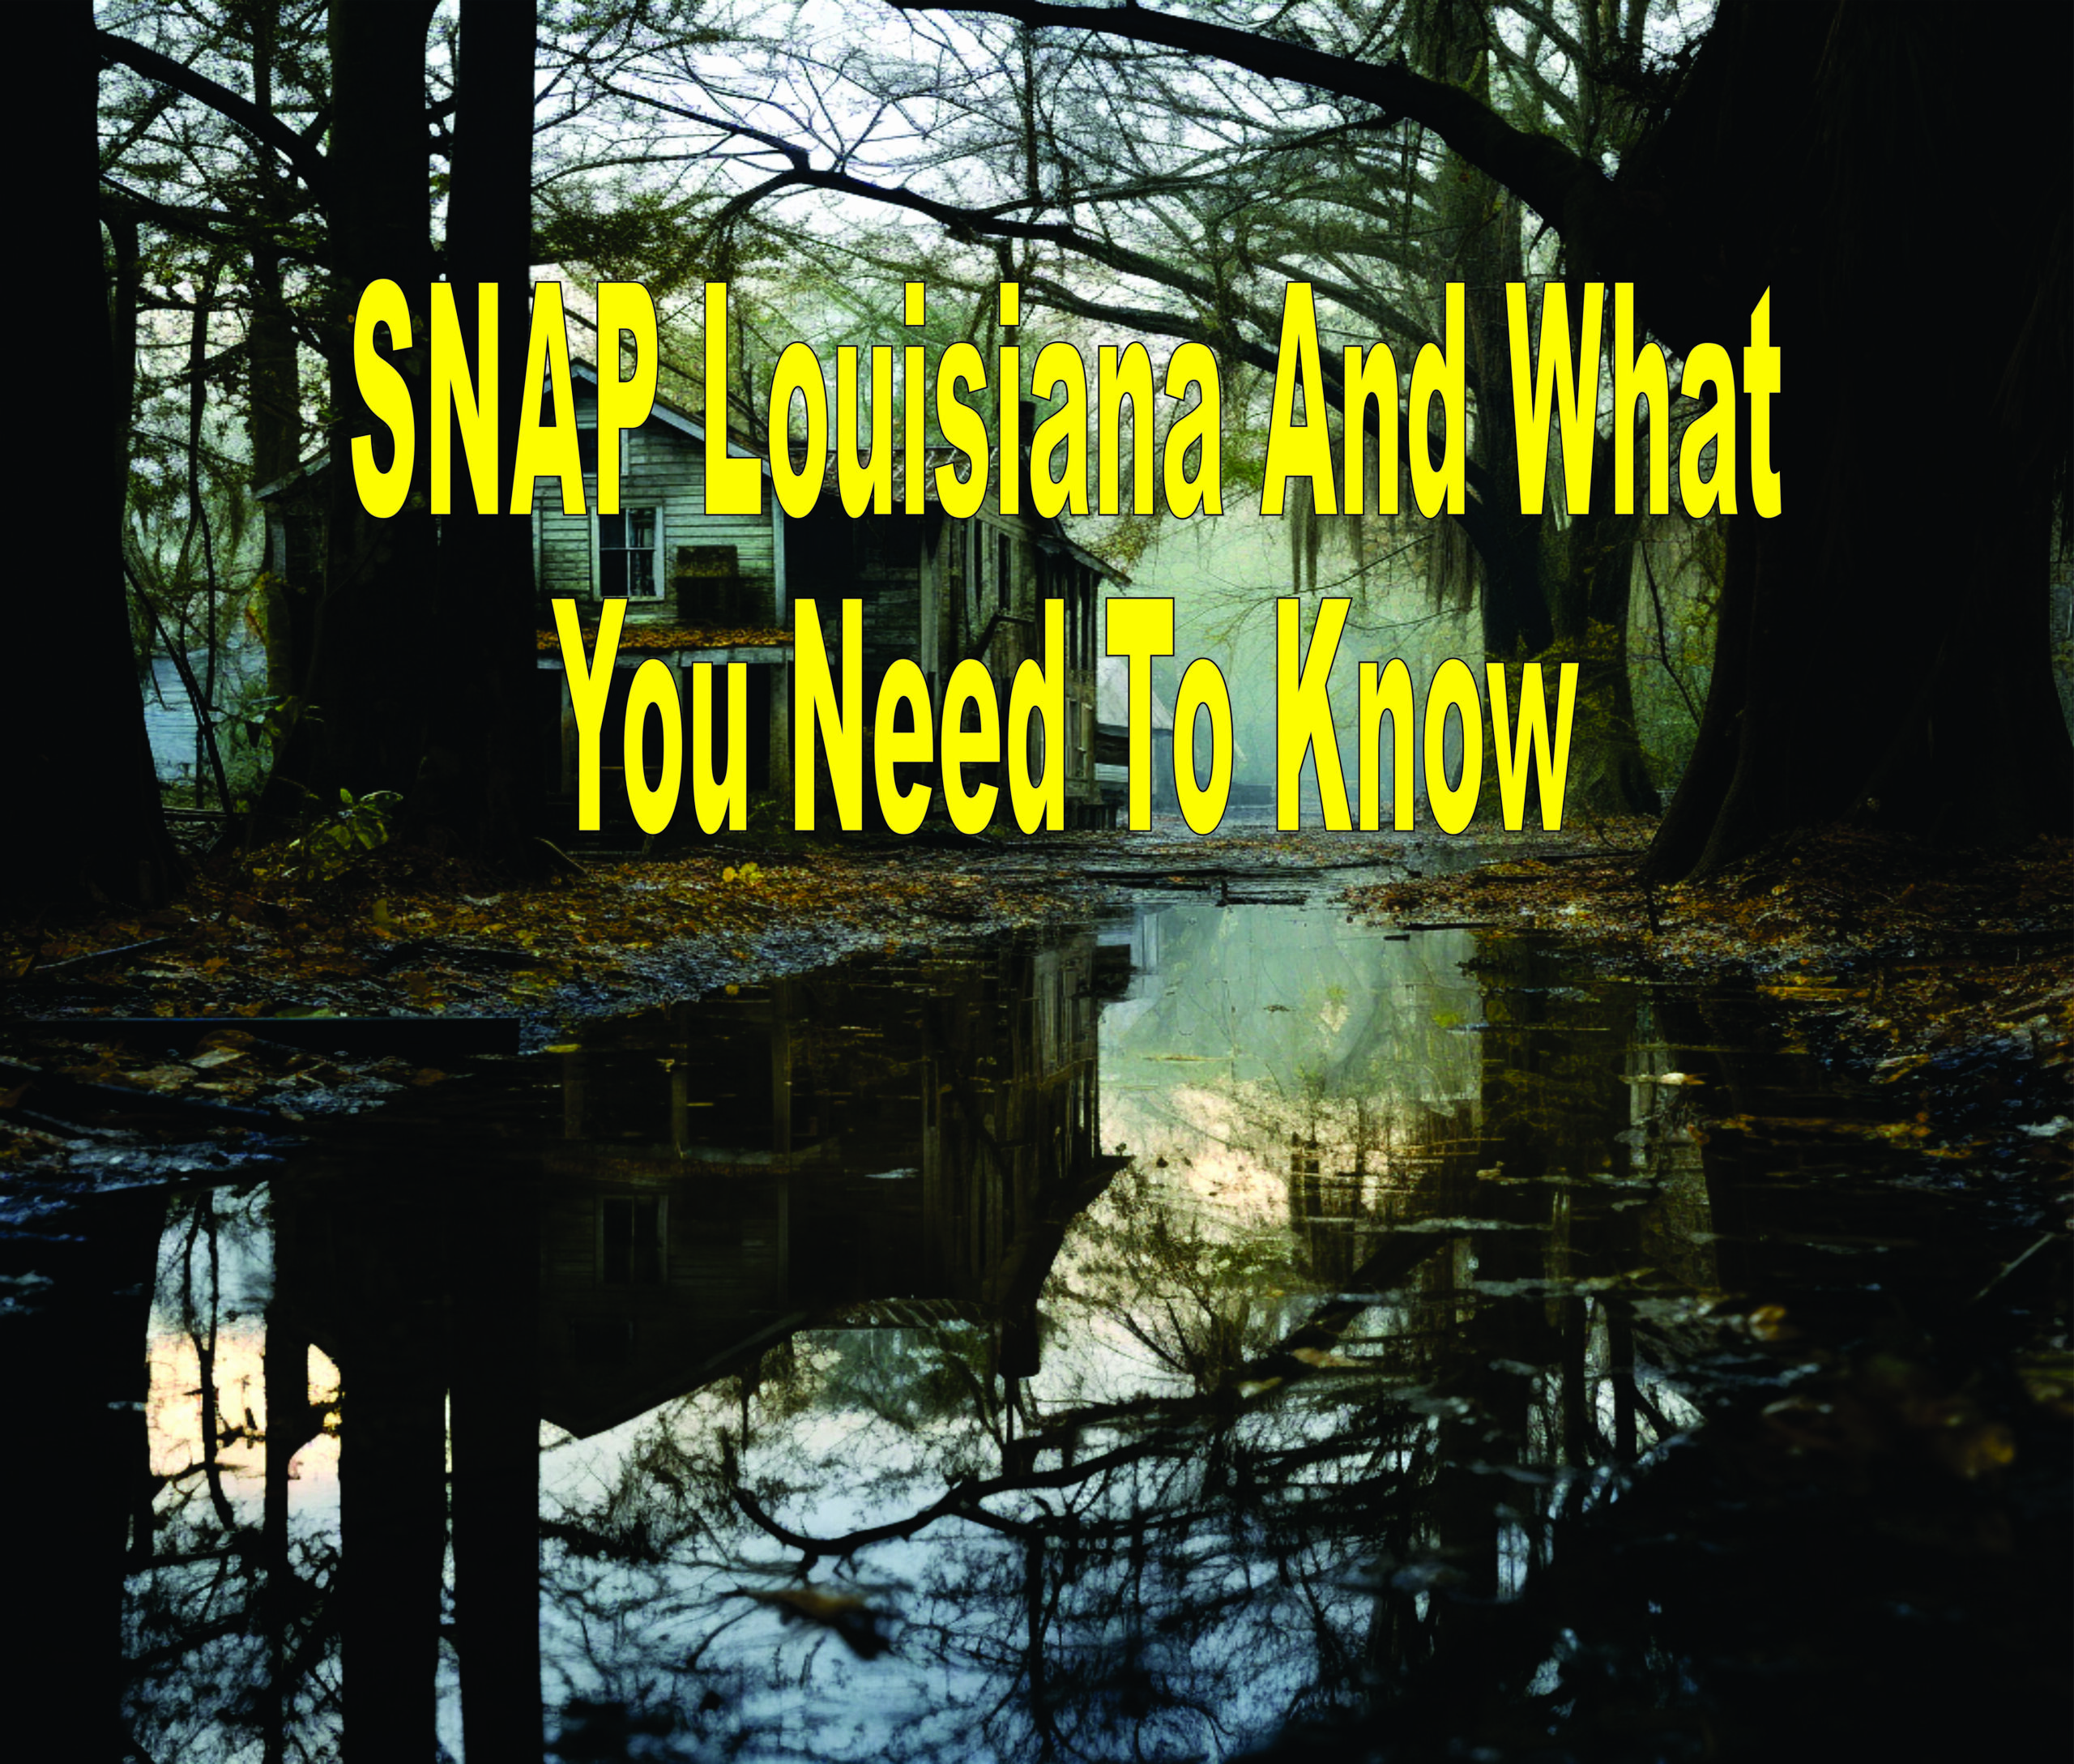 Snap Louisiana And What You Need To Know